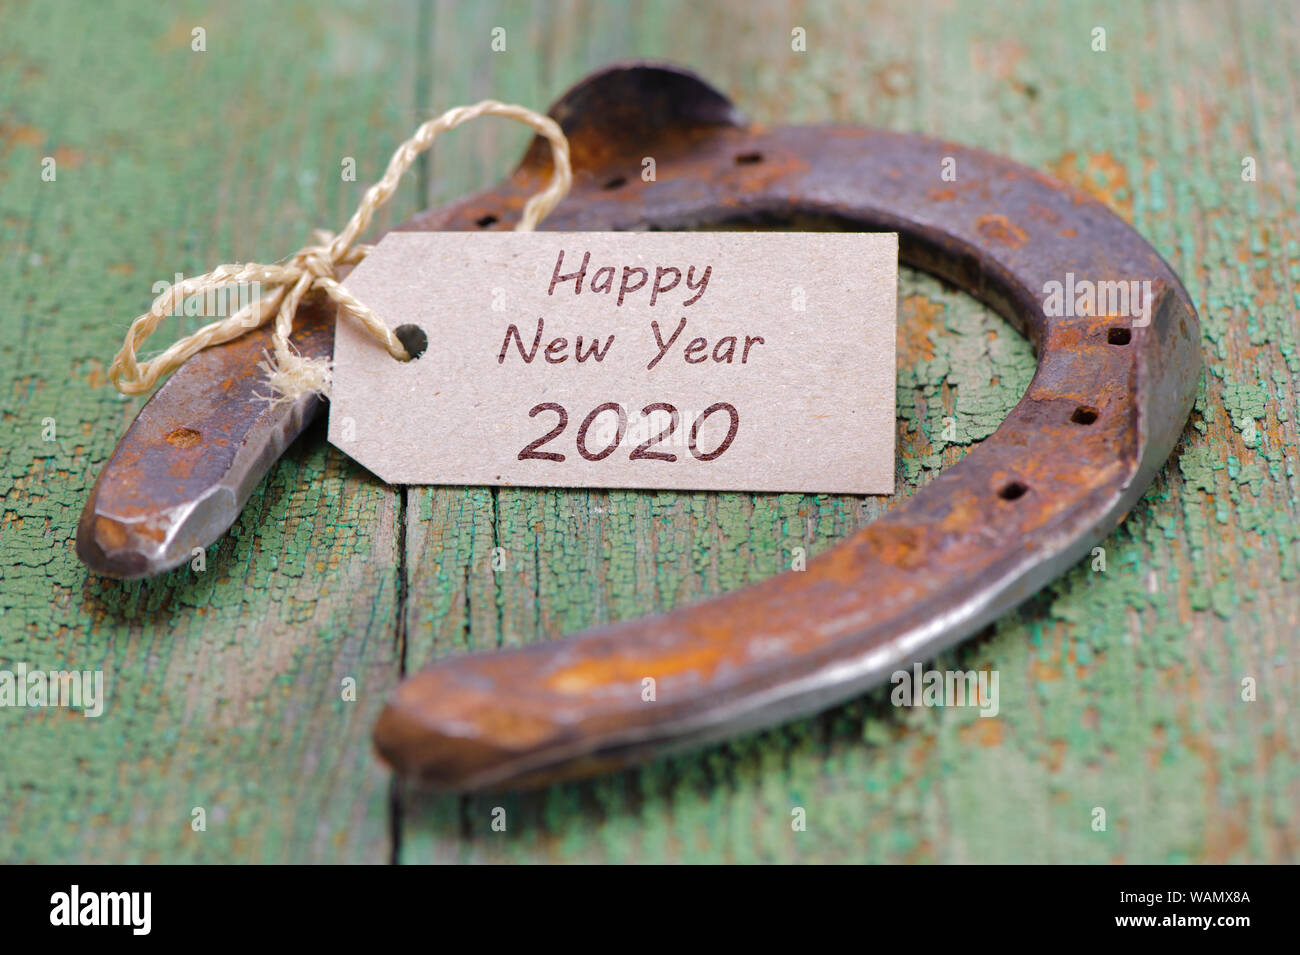 Happy new year 2020 with rusty horse shoe Stock Photo